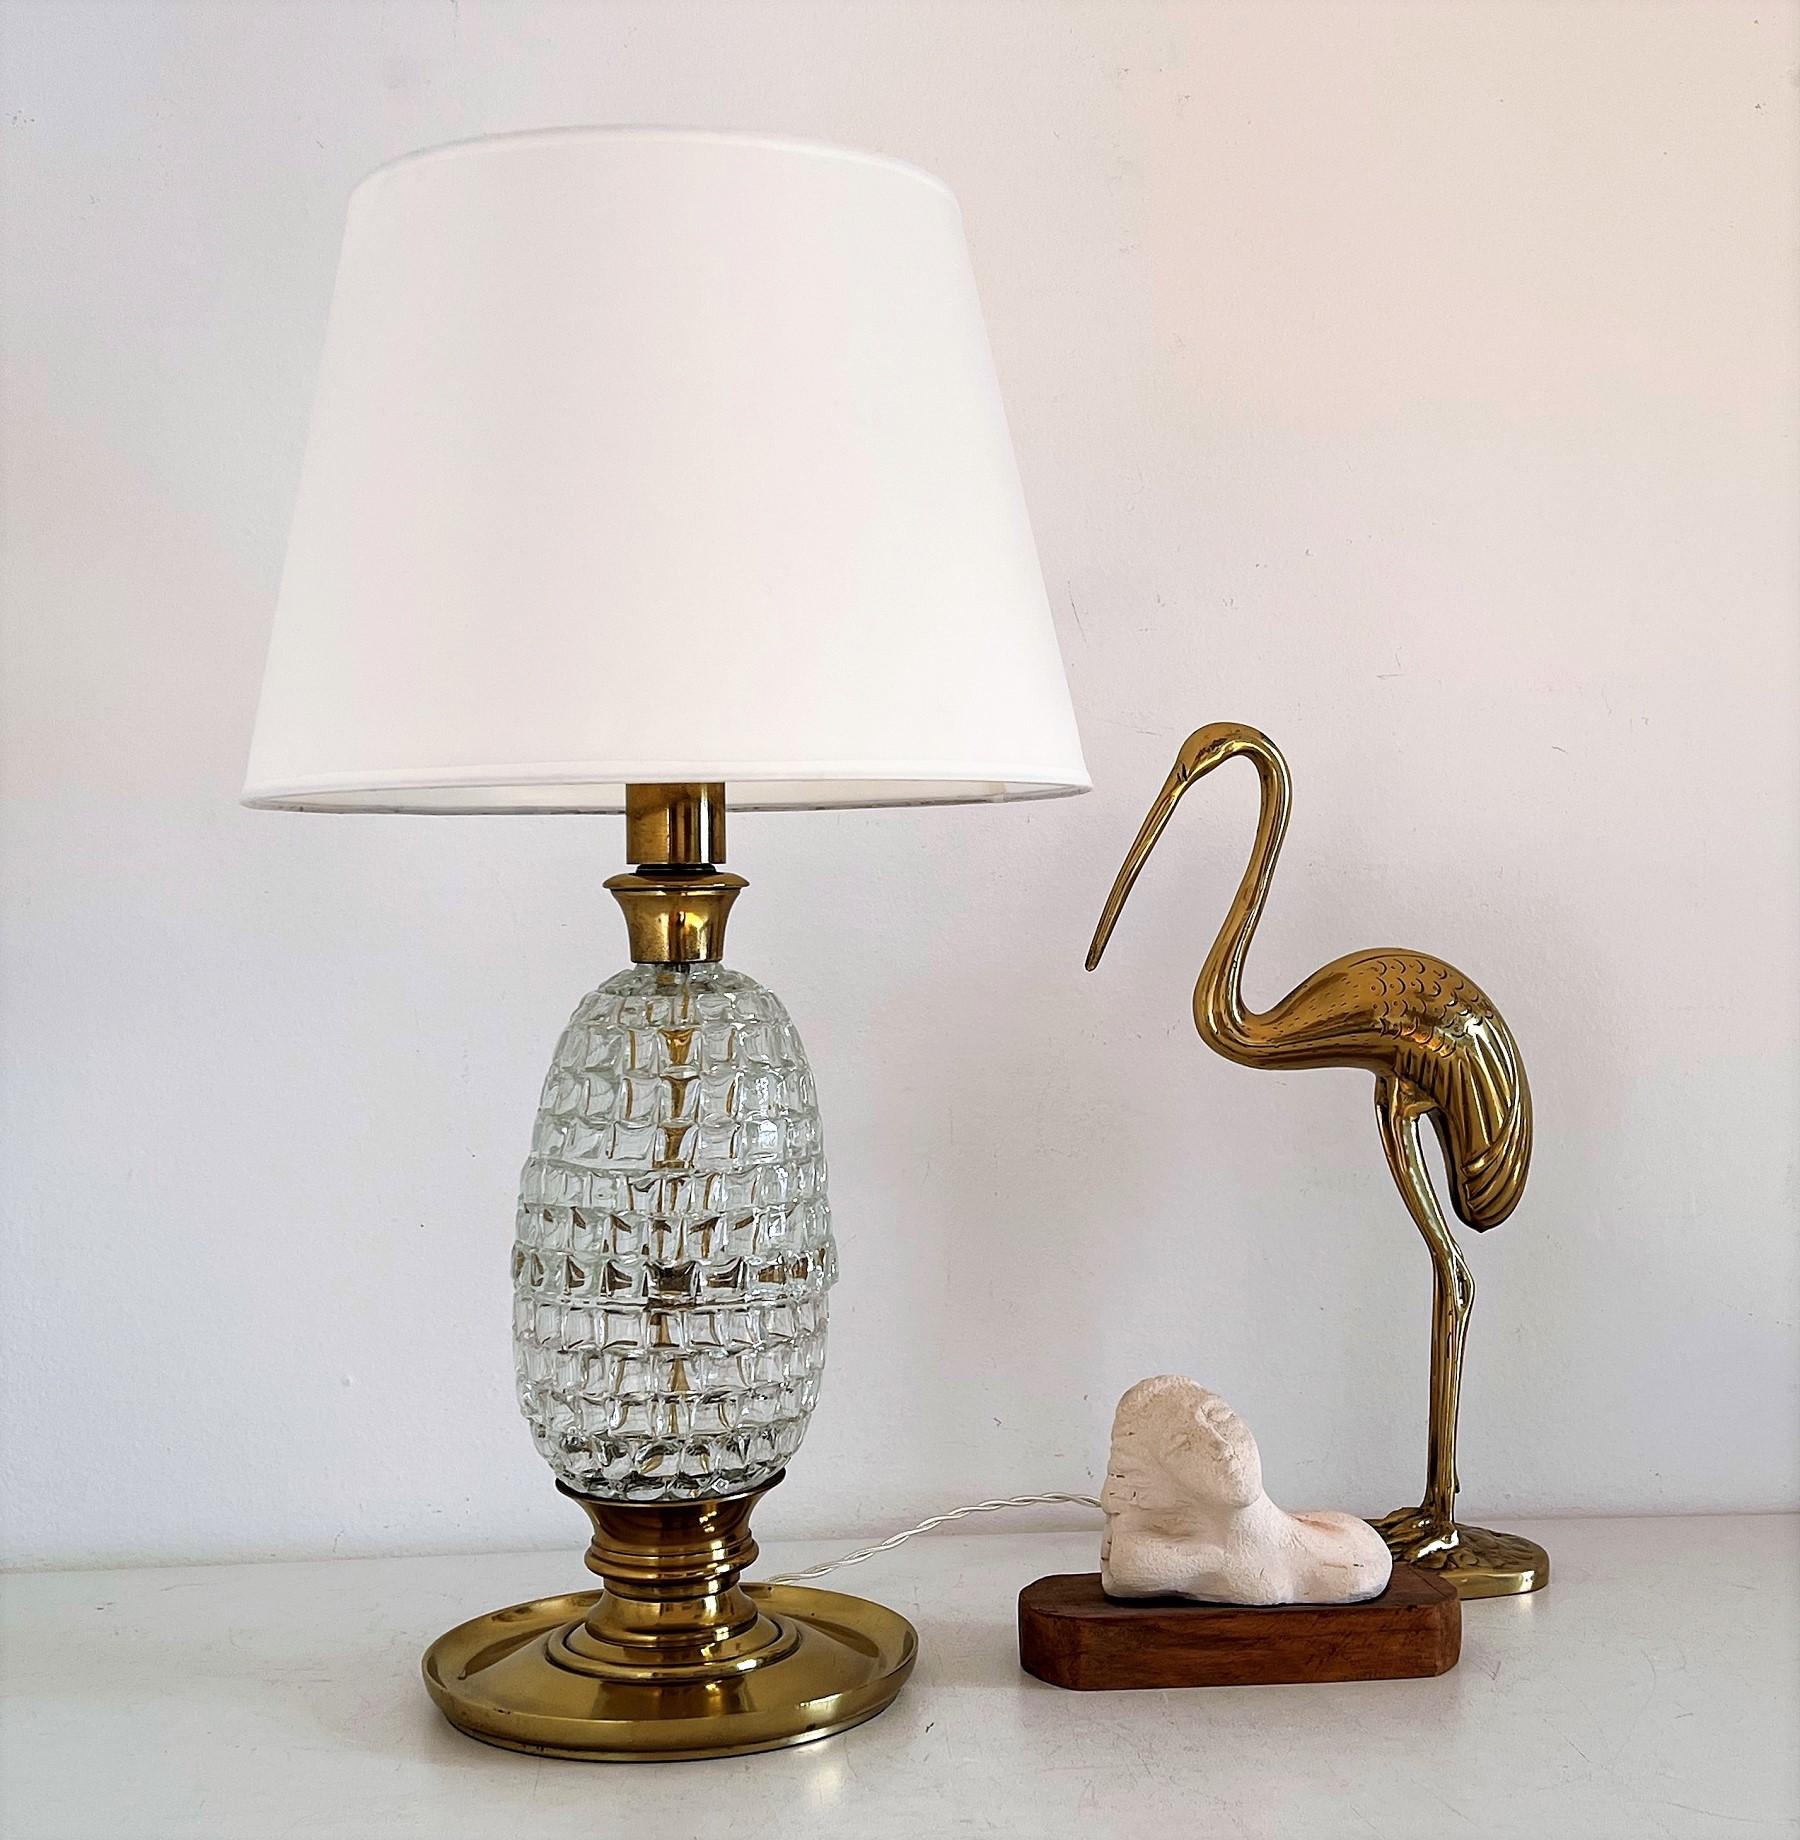 Italian Mid-Century Table Lamp with Brass and Creased Murano Glass Body, 1960s For Sale 9